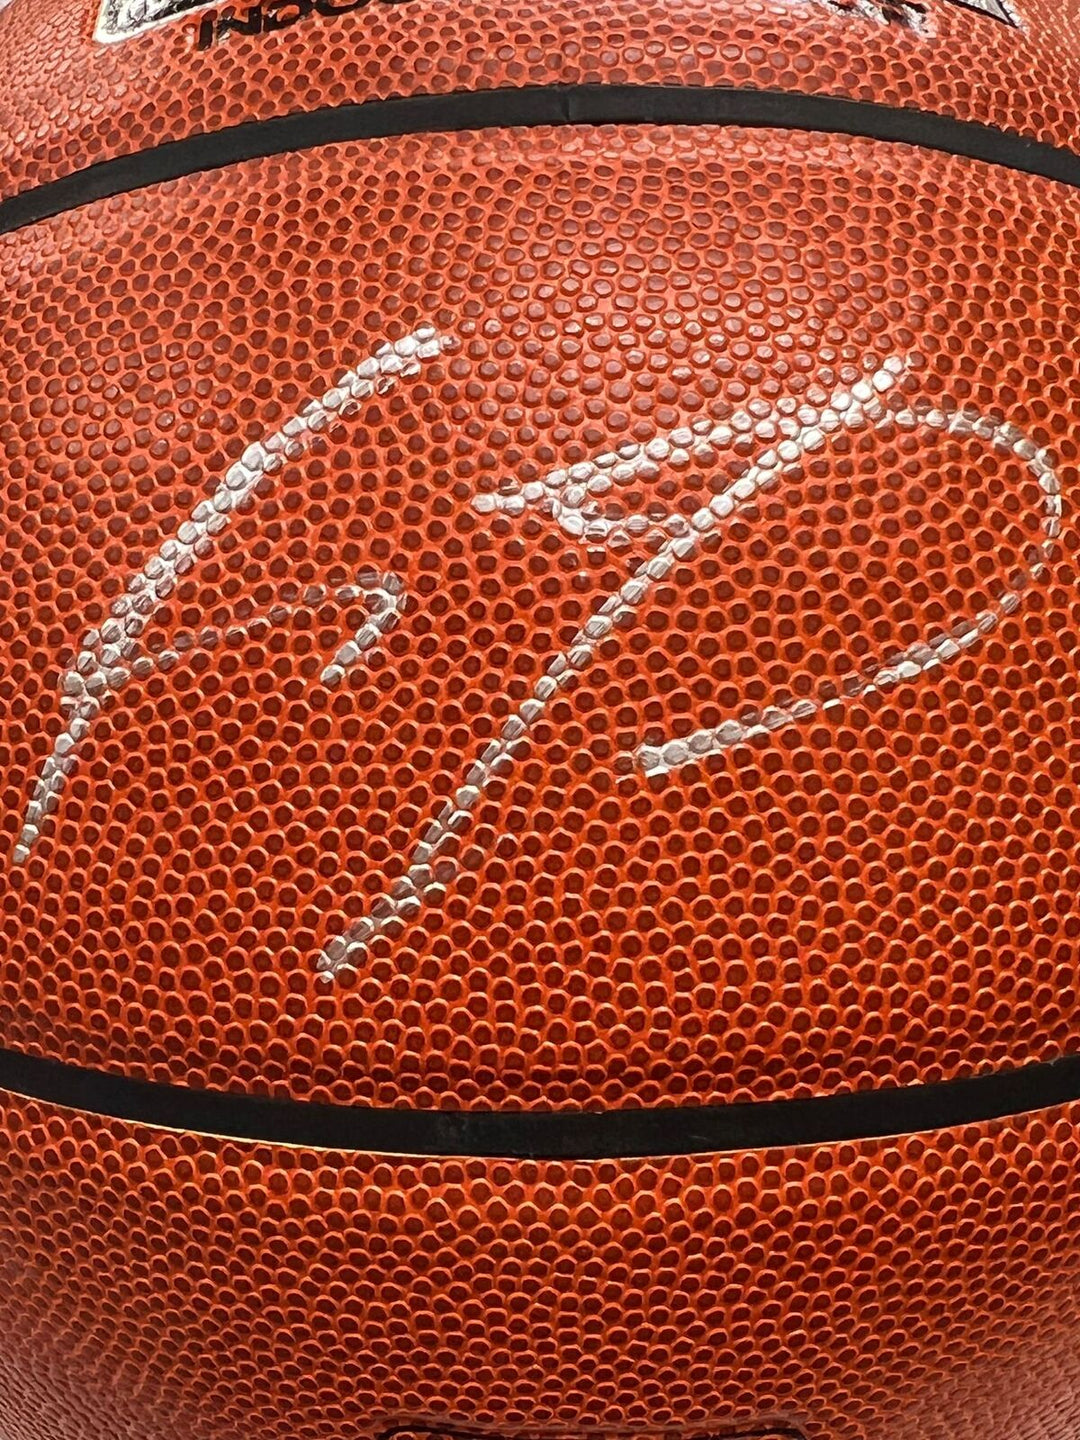 Kawhi Leonard Signed Basketball PSA/DNA Los Angeles Clippers Autographed Image 3